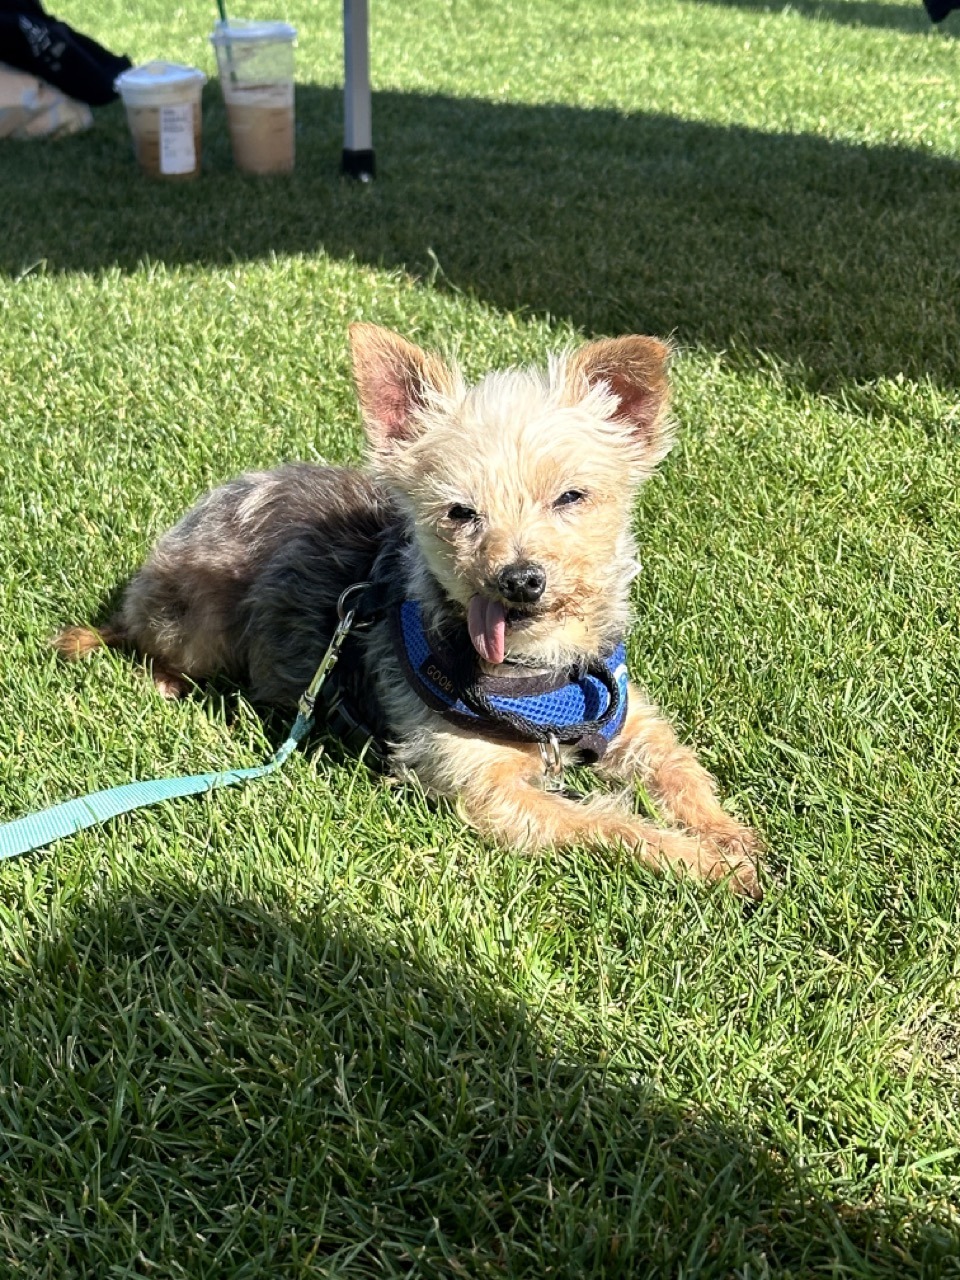 A yorkie with his tongue sticking out on the grass